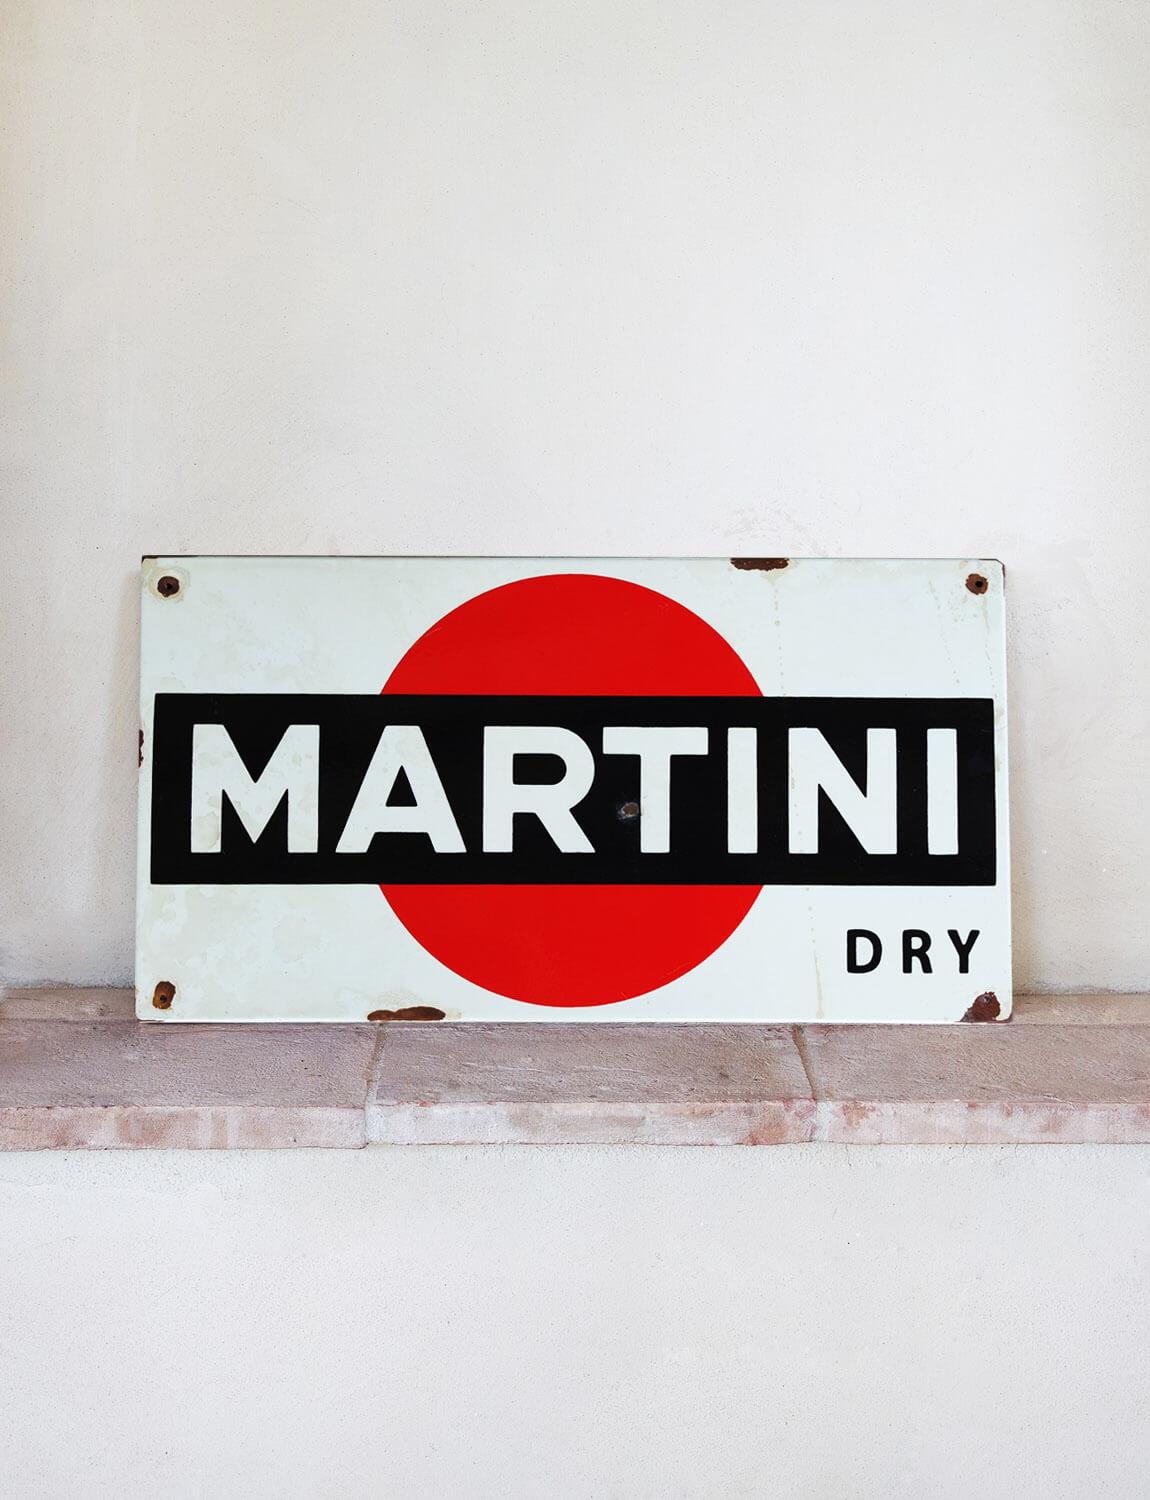 Small 1960s Martini Dry Sign was found in Milan in a bar that was closing down. The original martini sign is made of metal and has a painted enamelled finish. These signs were prevalent in bars in Italy in the 1950s, 1960s and 1970s. They now make